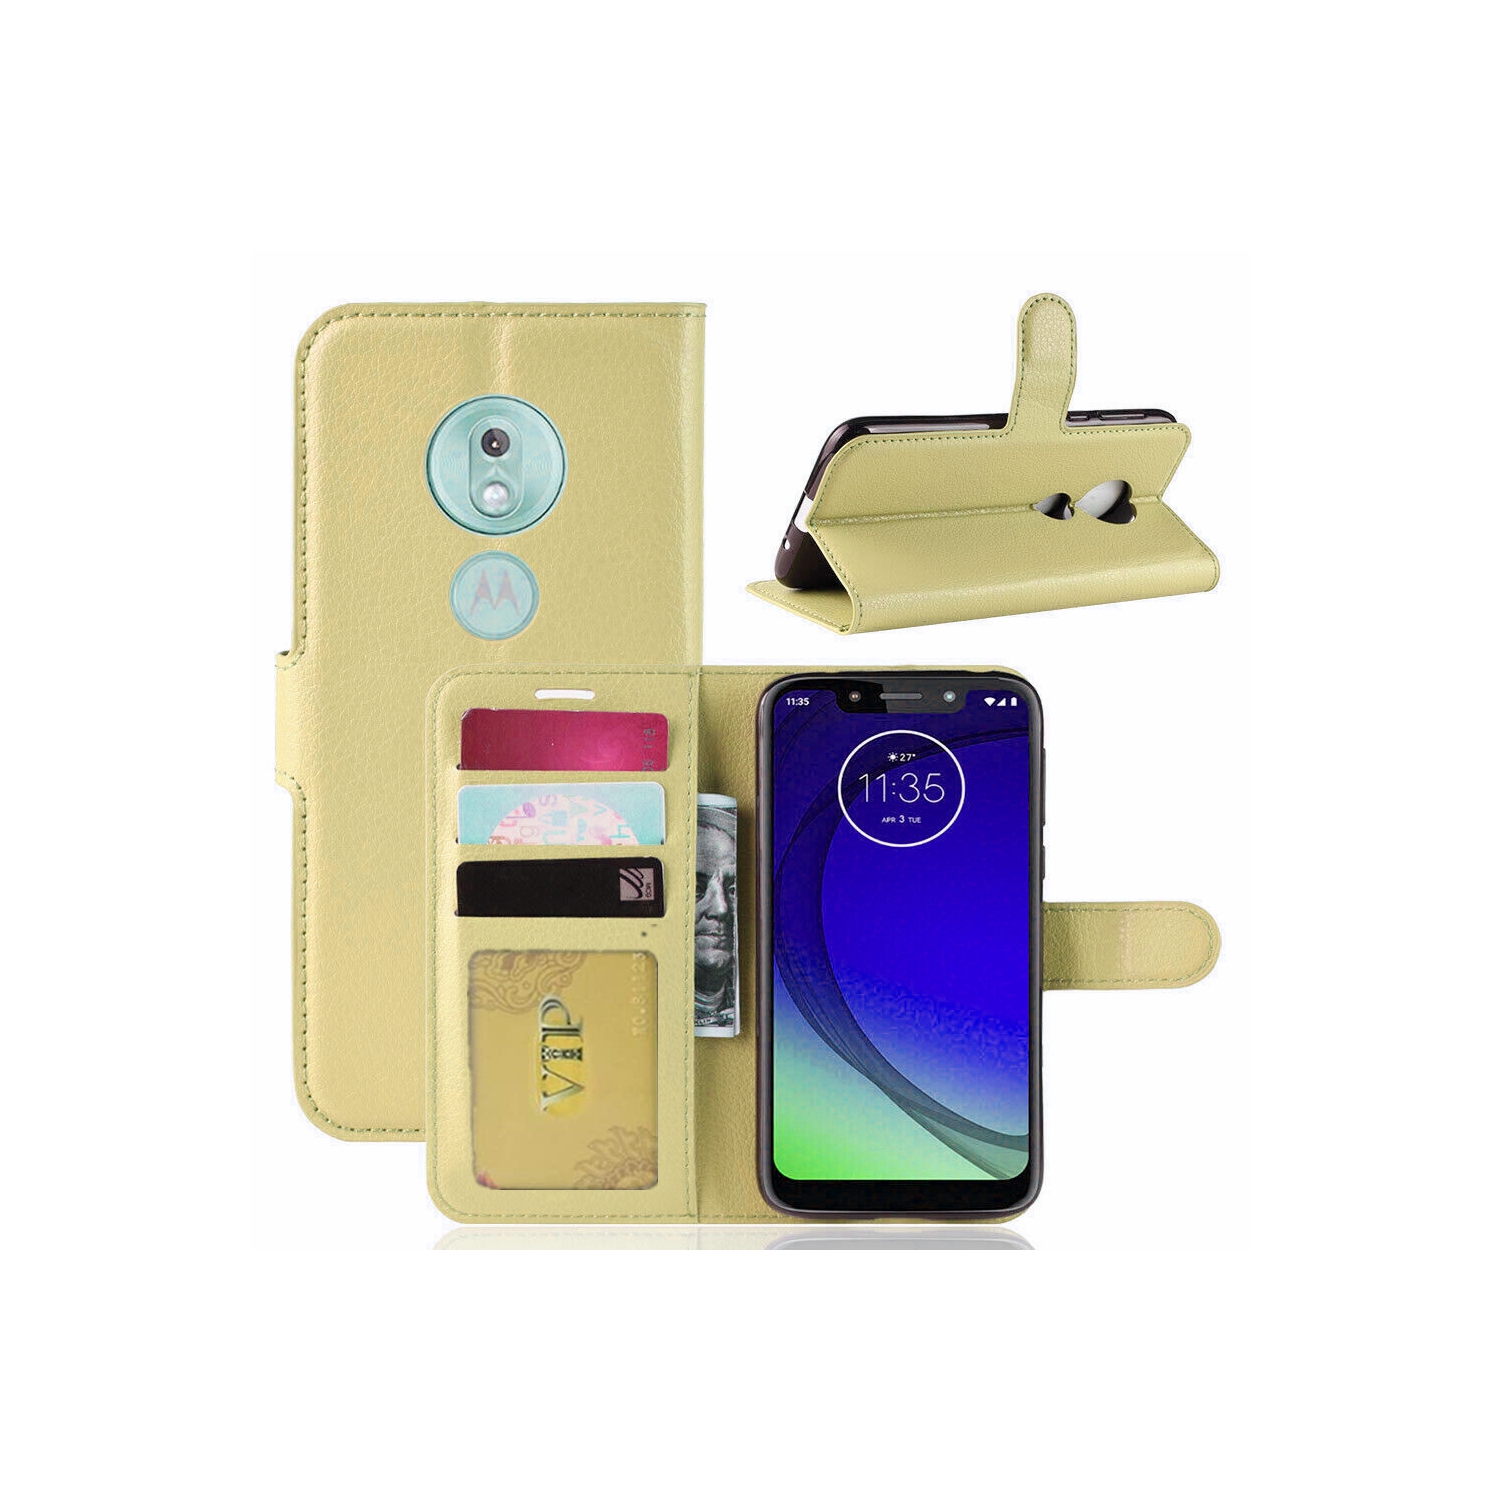 [CS] Motorola Moto G7 Case, Magnetic Leather Folio Wallet Flip Case Cover with Card Slot, Gold